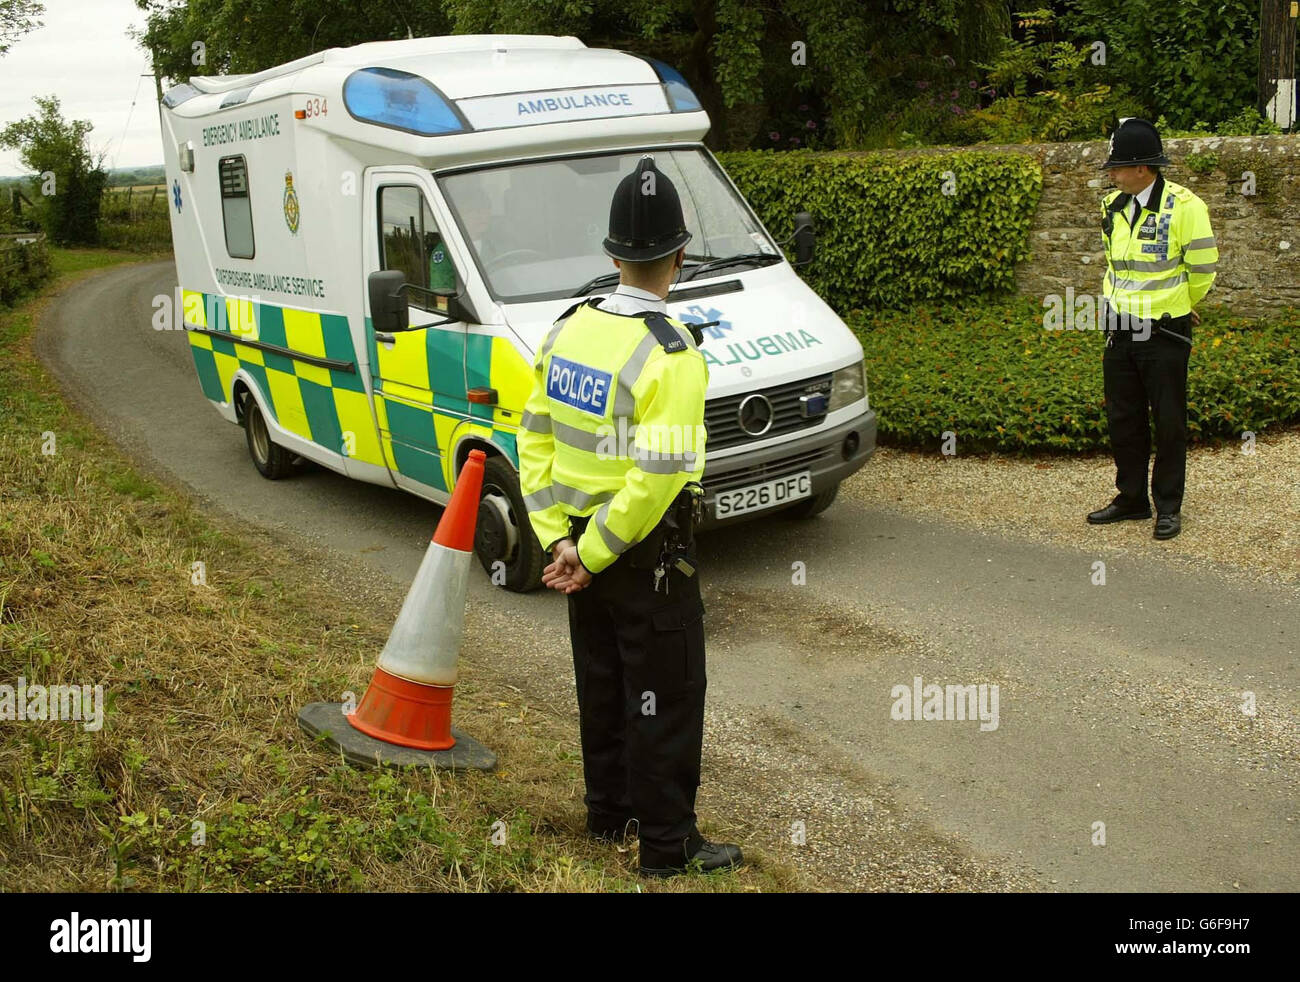 Police officers watch as an ambulance leaves Harrowdown Hill in Oxfordshire where a man's body was found. Dr David Kelly, who is thought to be the Ministry of Defence mole who briefed BBC journalist Andrew Gilligan about the build up to the Gulf War, * ... has been missing from his home nearby since yesterday. Stock Photo